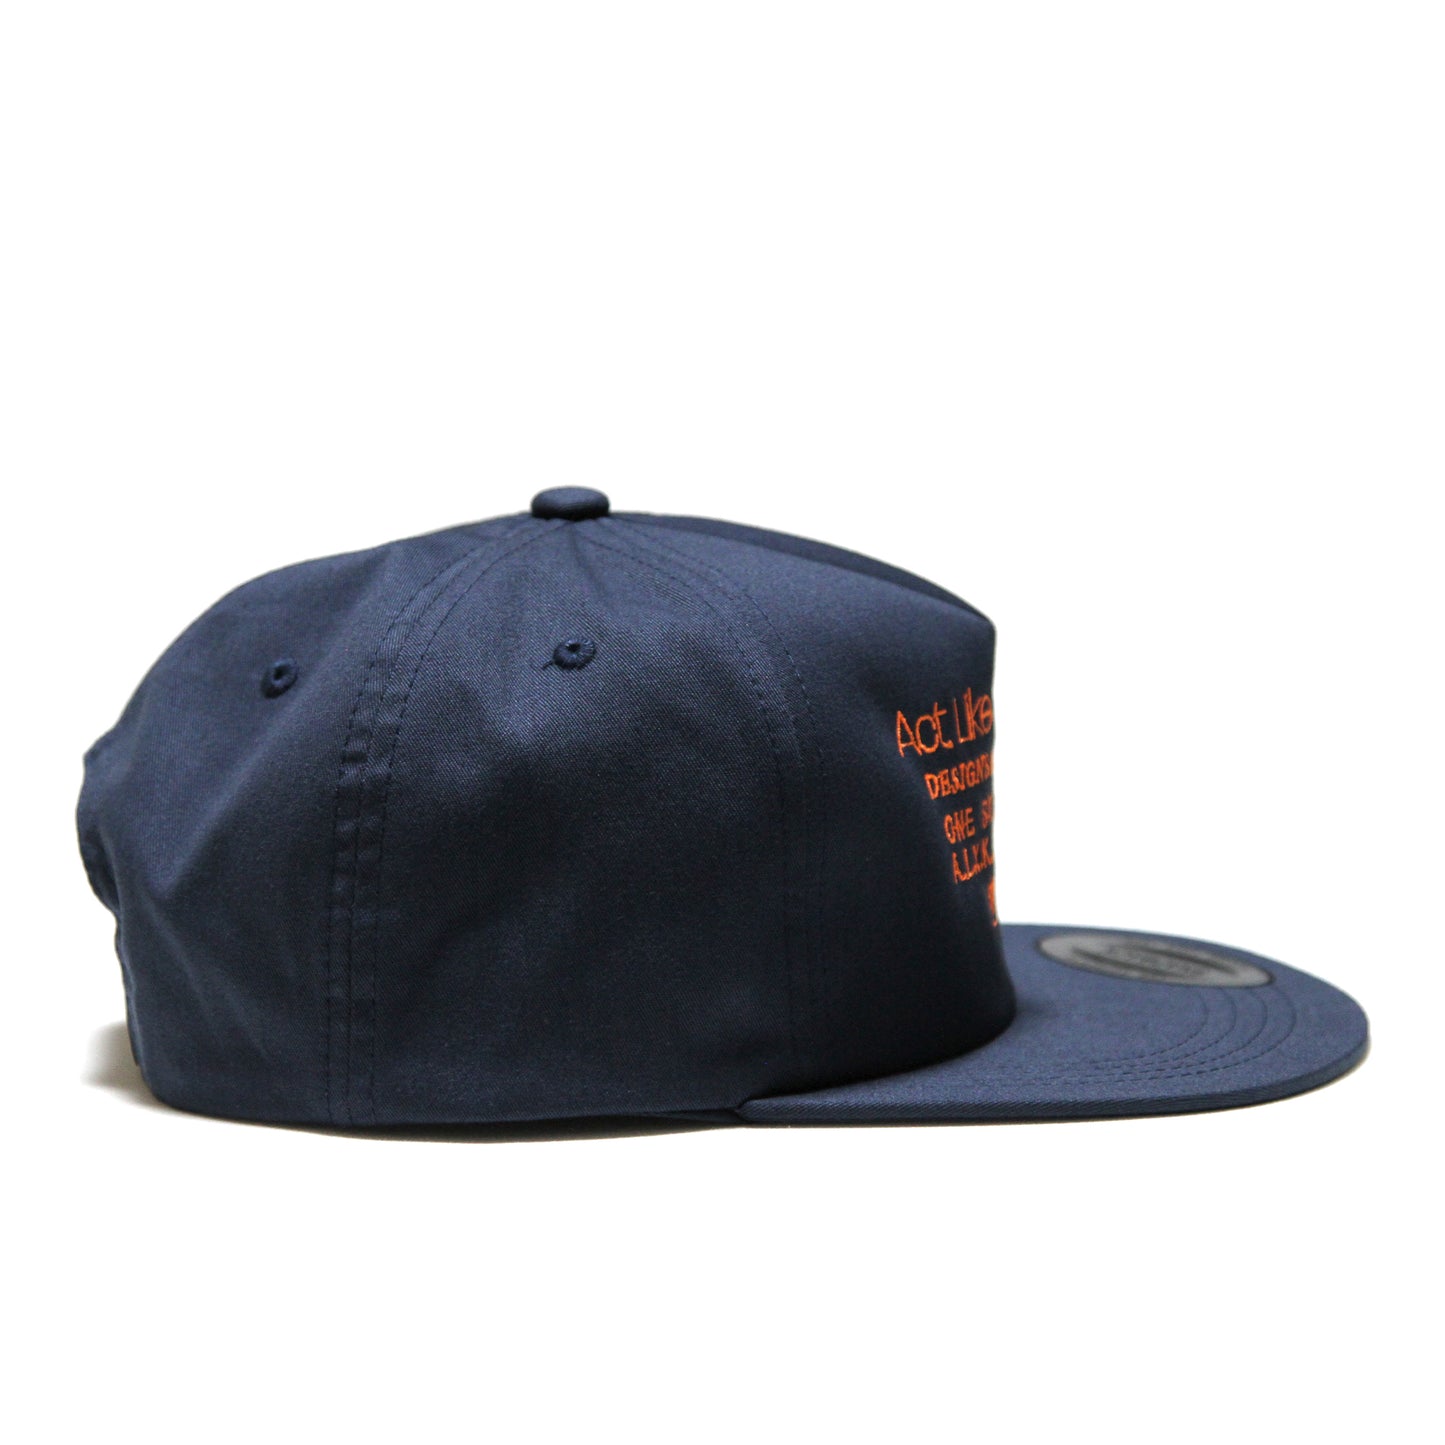 ALYK - Instruction Embroidered Patch 5 Panel Cap/Navy